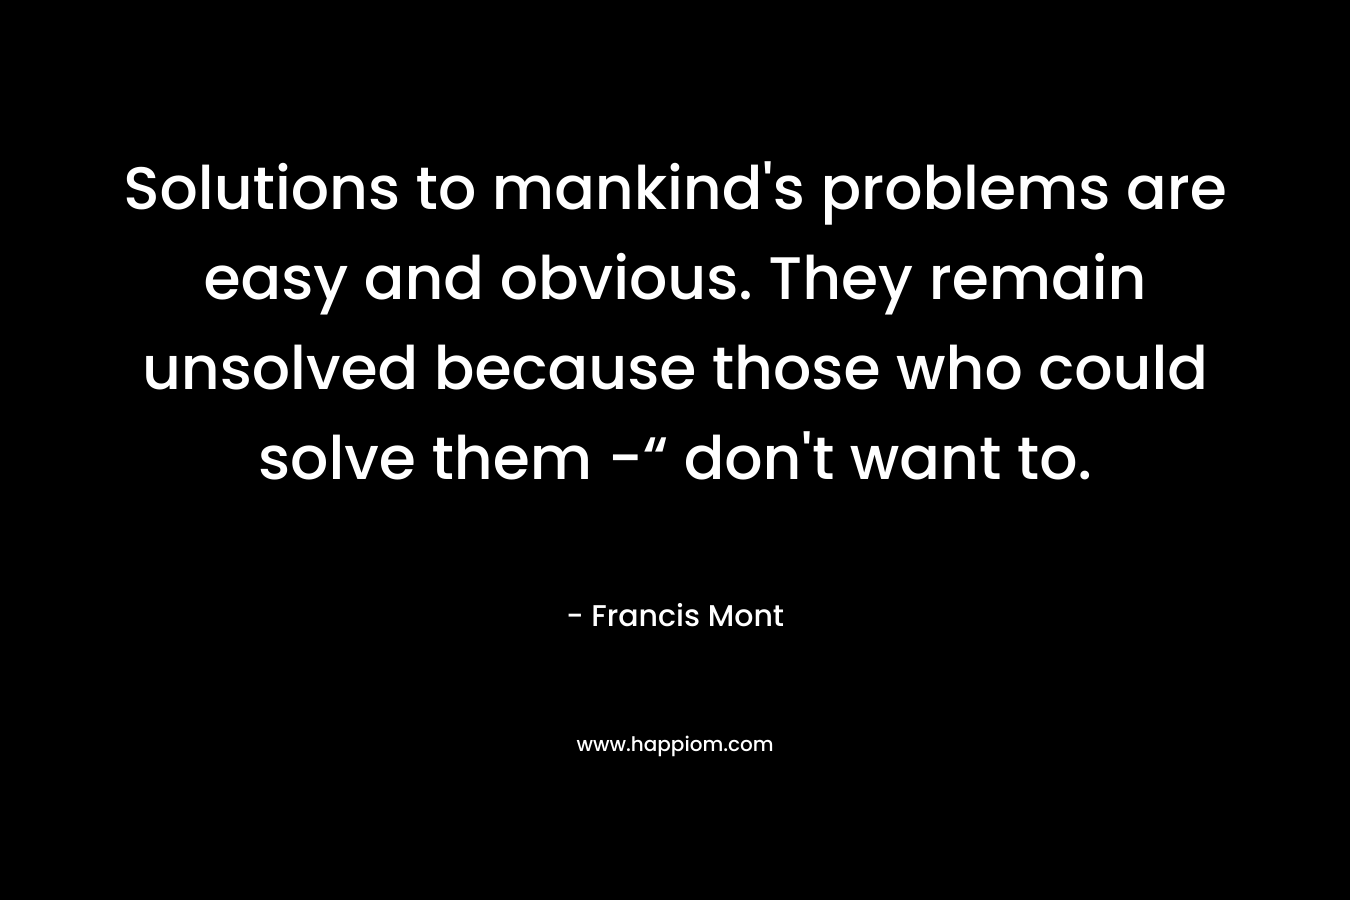 Solutions to mankind’s problems are easy and obvious. They remain unsolved because those who could solve them -“ don’t want to. – Francis Mont